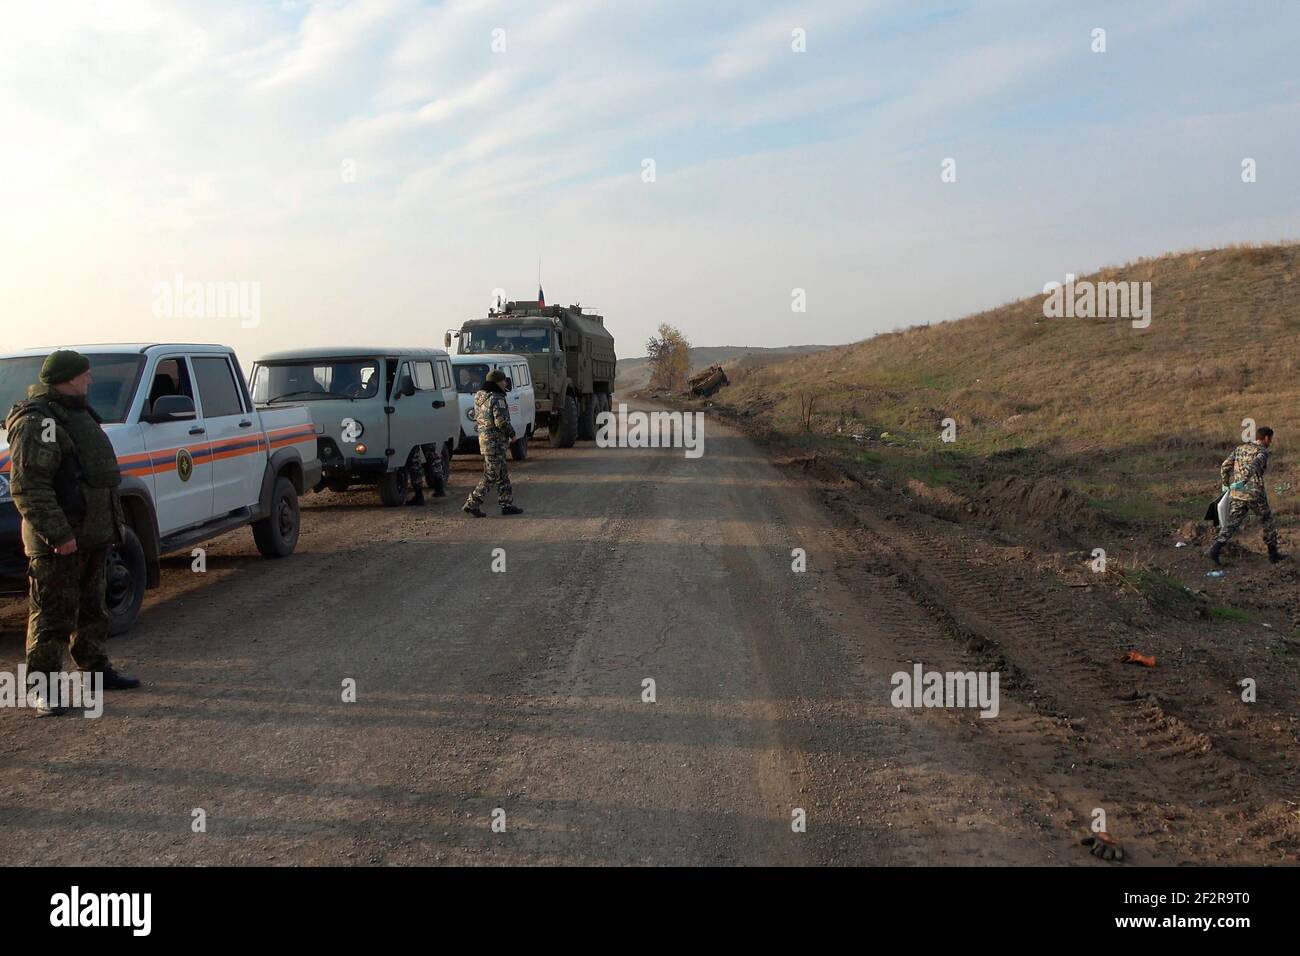 JABRAYIL, AZERBAIJAN - DECEMBER 15: Russian peacekeepers escort a convoy that includes Nagorno-Karabakh emergency personnel and Red Cross officials which mission is to search for remains of Armenian fighters killed in the conflict over the disputed region of Nagorno-Karabakh and transfer them to Armenia on December 15 2020 in the Jabrayil Rayon of Azerbaijan. Heavy clashes erupted over Nagorno-Karabakh in late September during which more than 5,600 people, including civilians, were killed. The sides agreed to a Russia-brokered cease-fire deal that took effect on November 10, resulting in Azerb Stock Photo